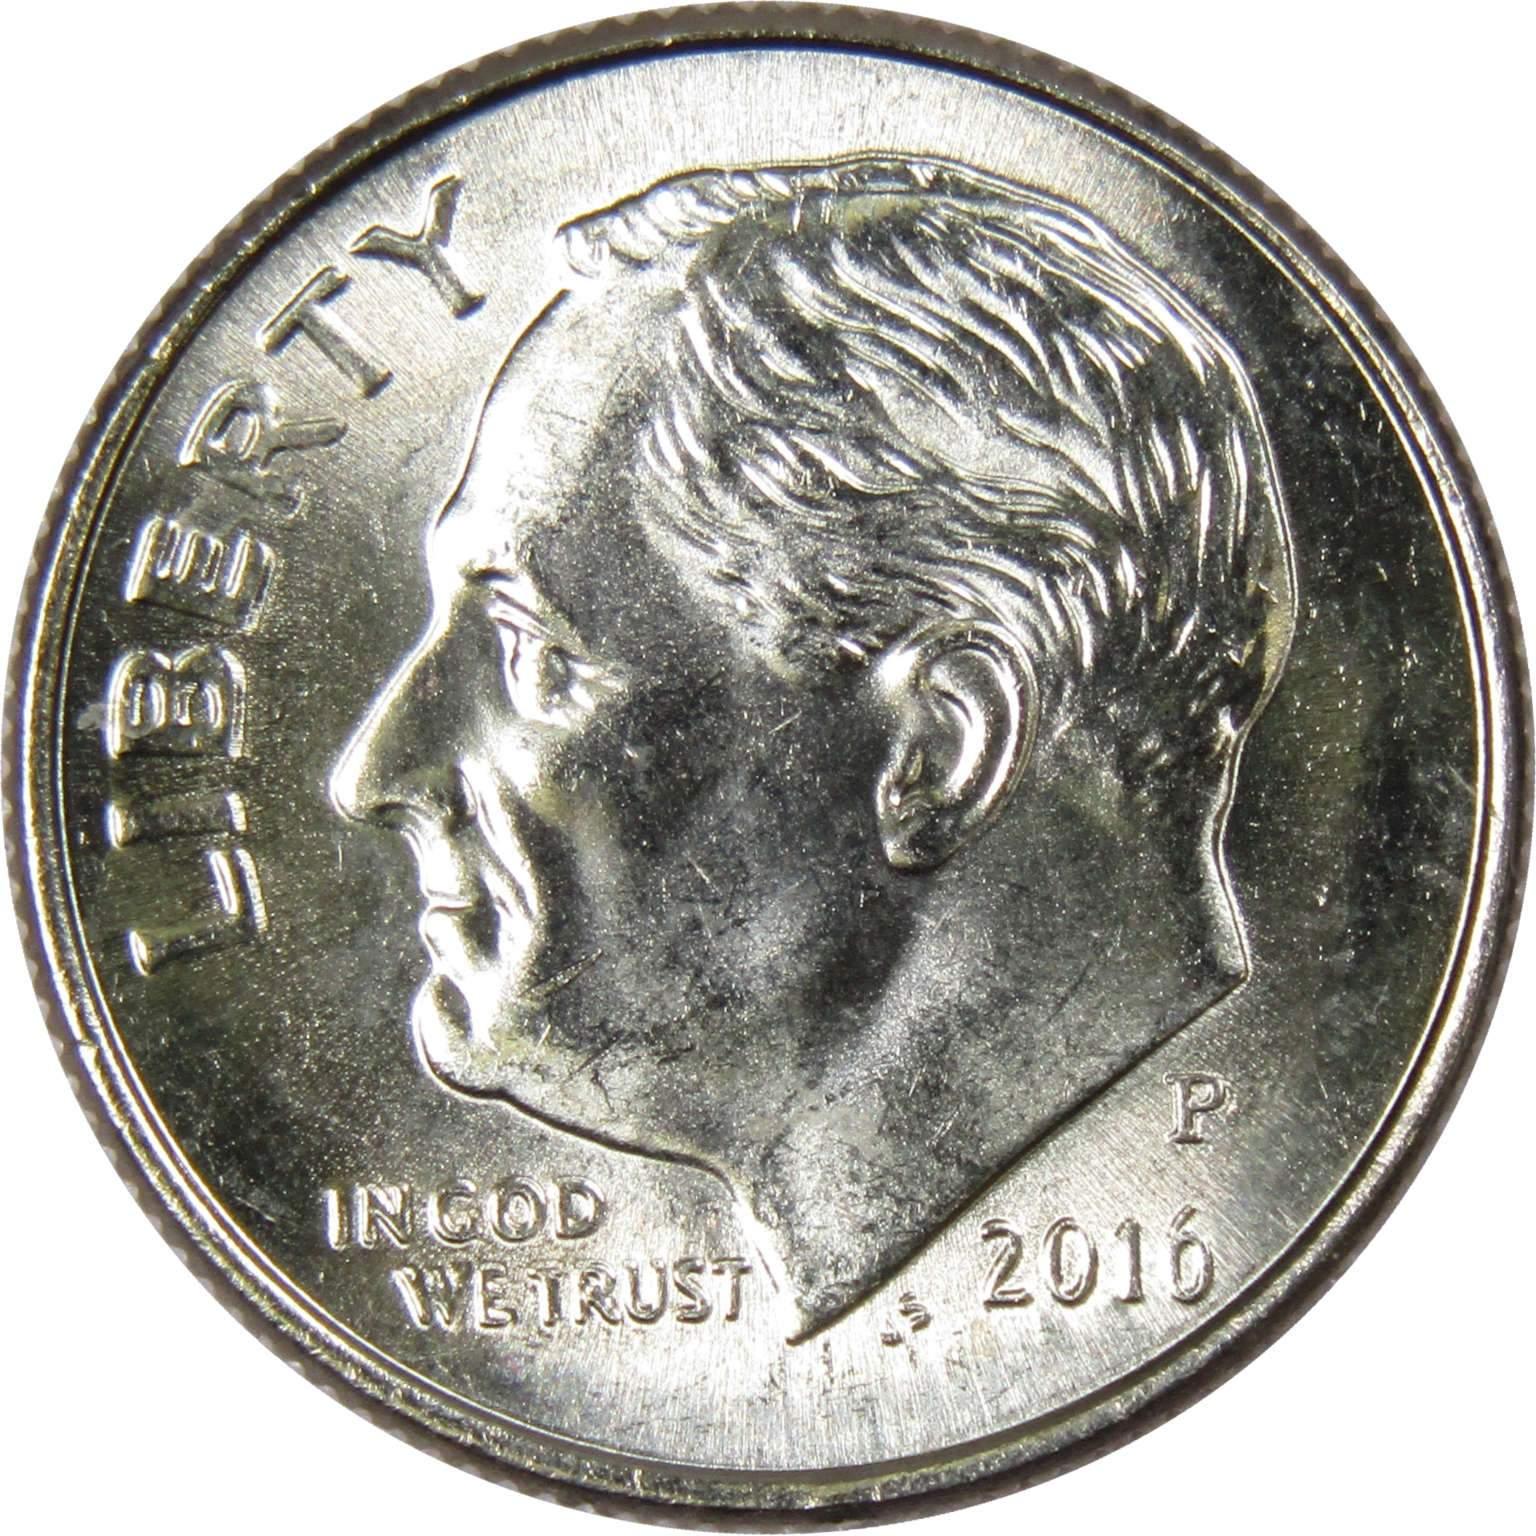 2016 P Roosevelt Dime BU Uncirculated Mint State 10c US Coin Collectible